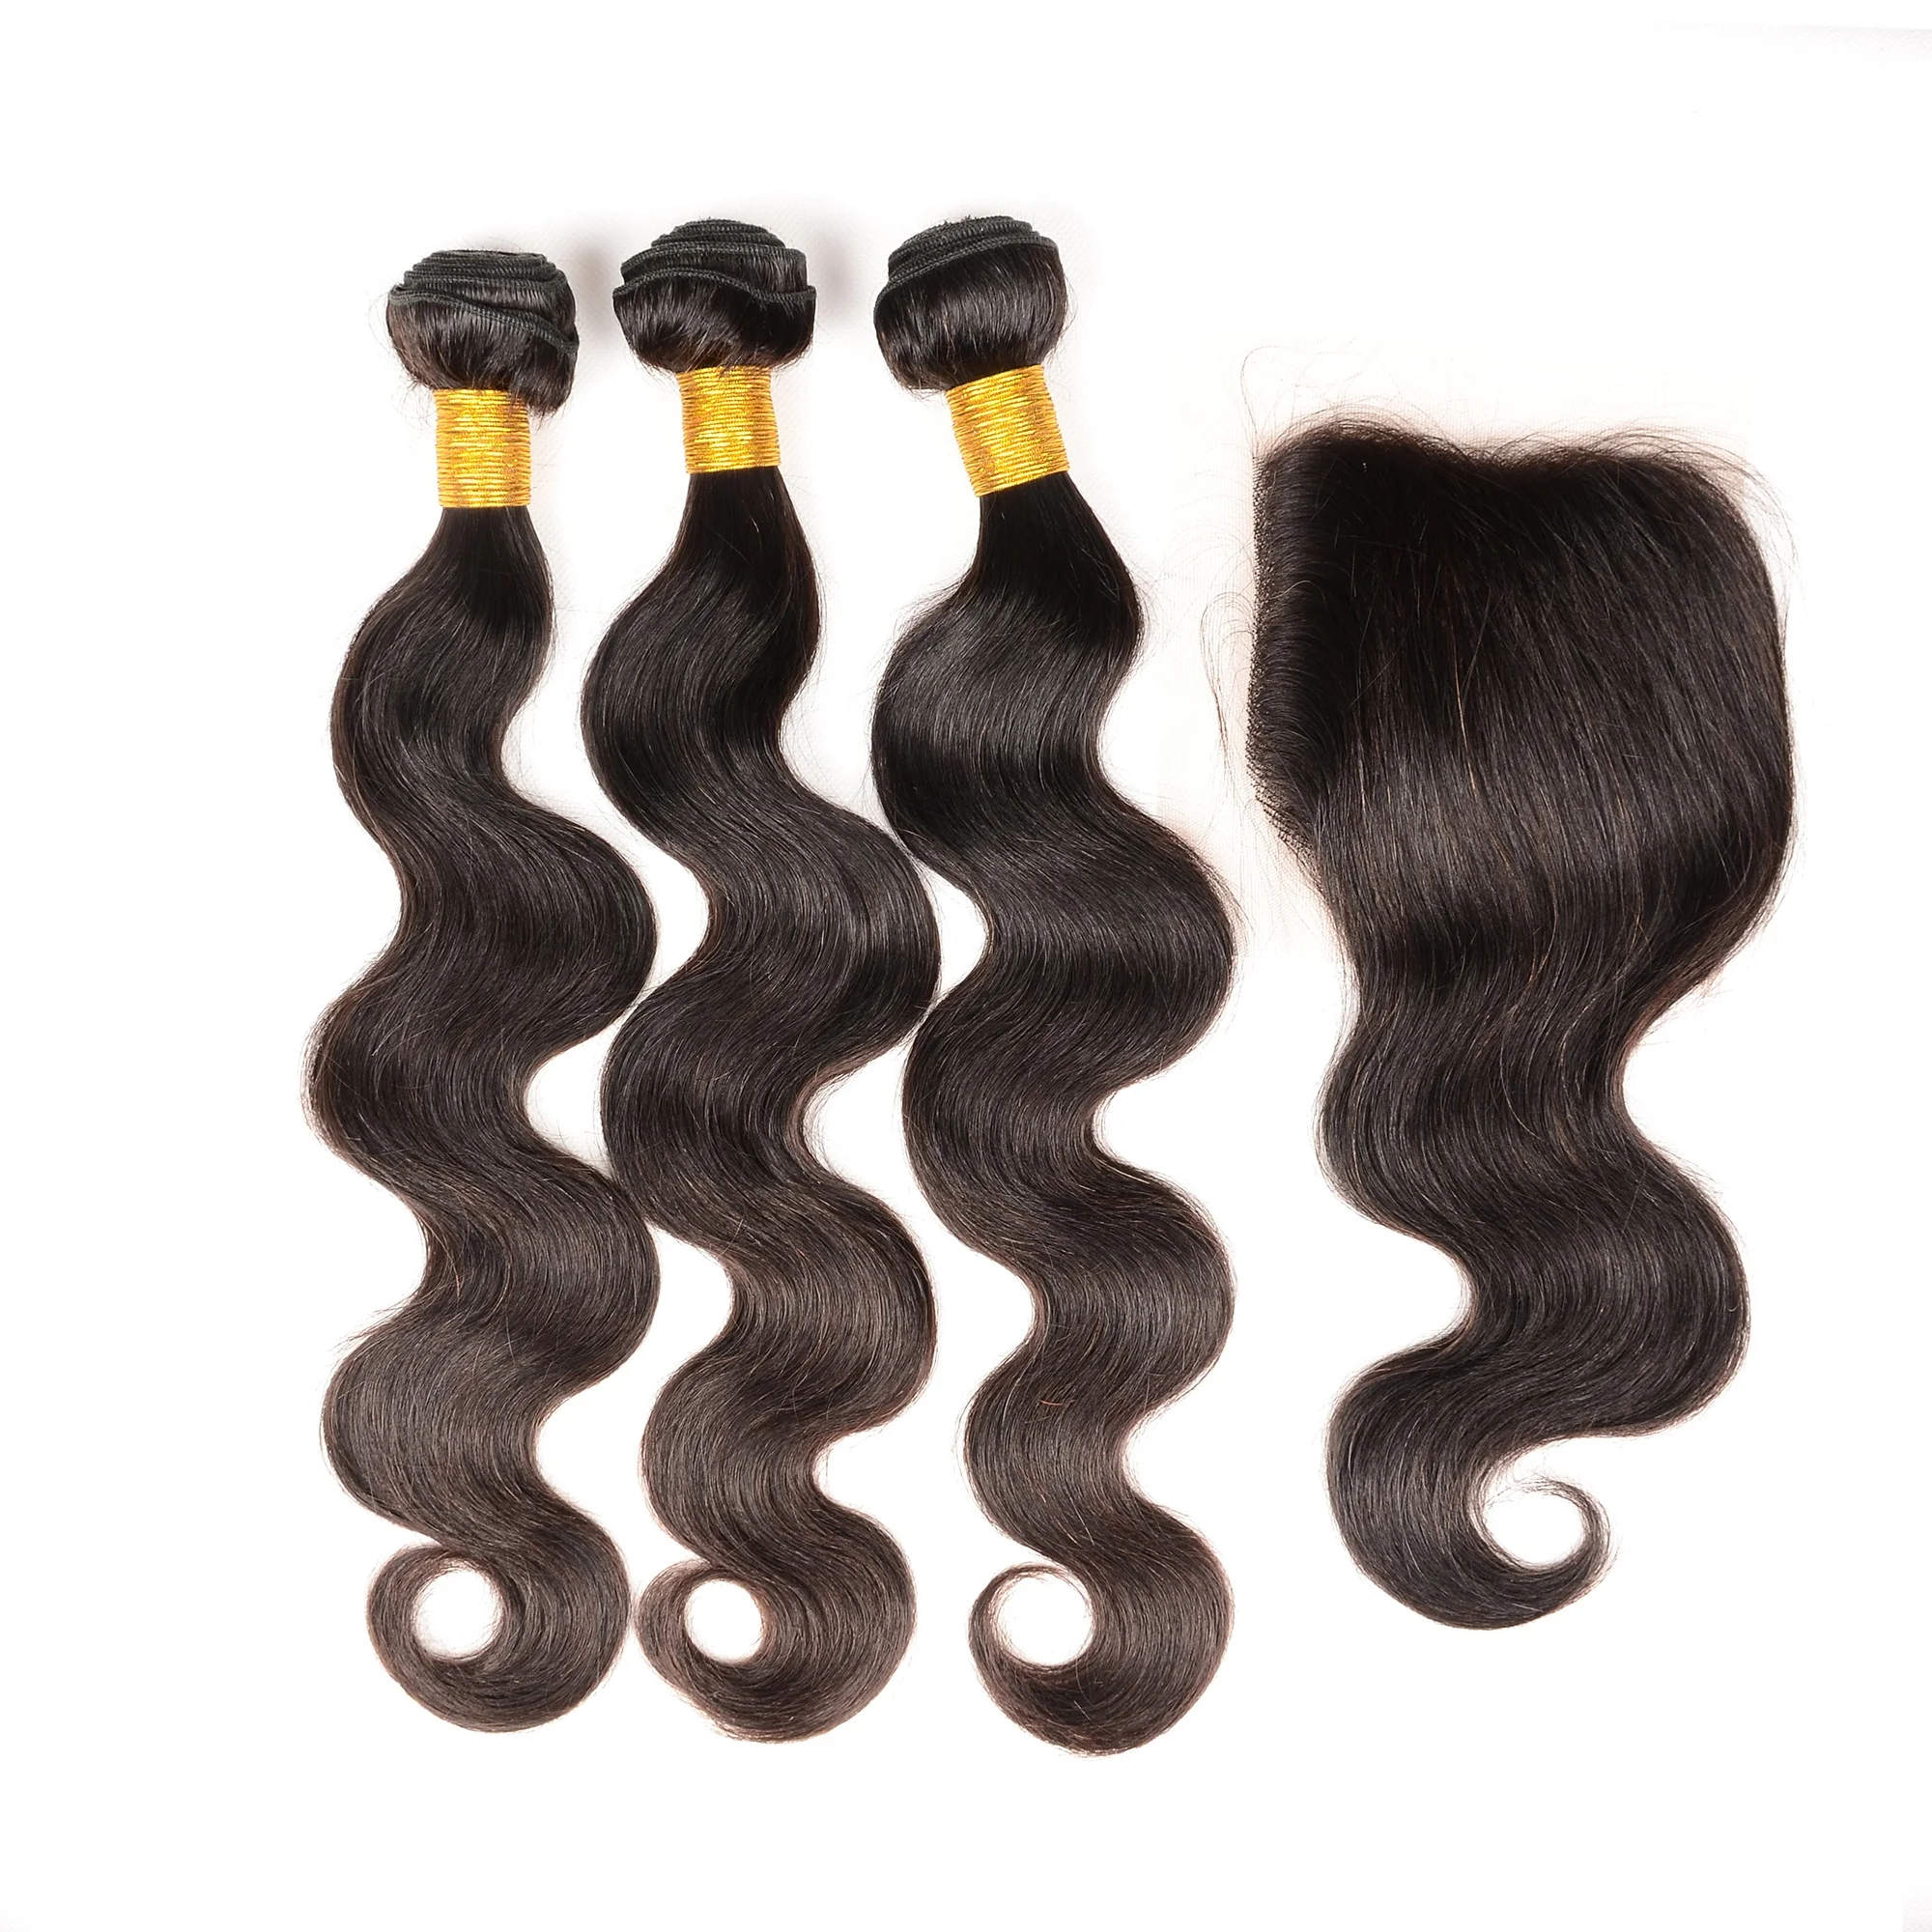 

100% Unprocessed Human Hair Raw Body Wave Hair Extensions 3 Bundles with a Free Part Lace Closure,Indian Virgin Human Hair Weave